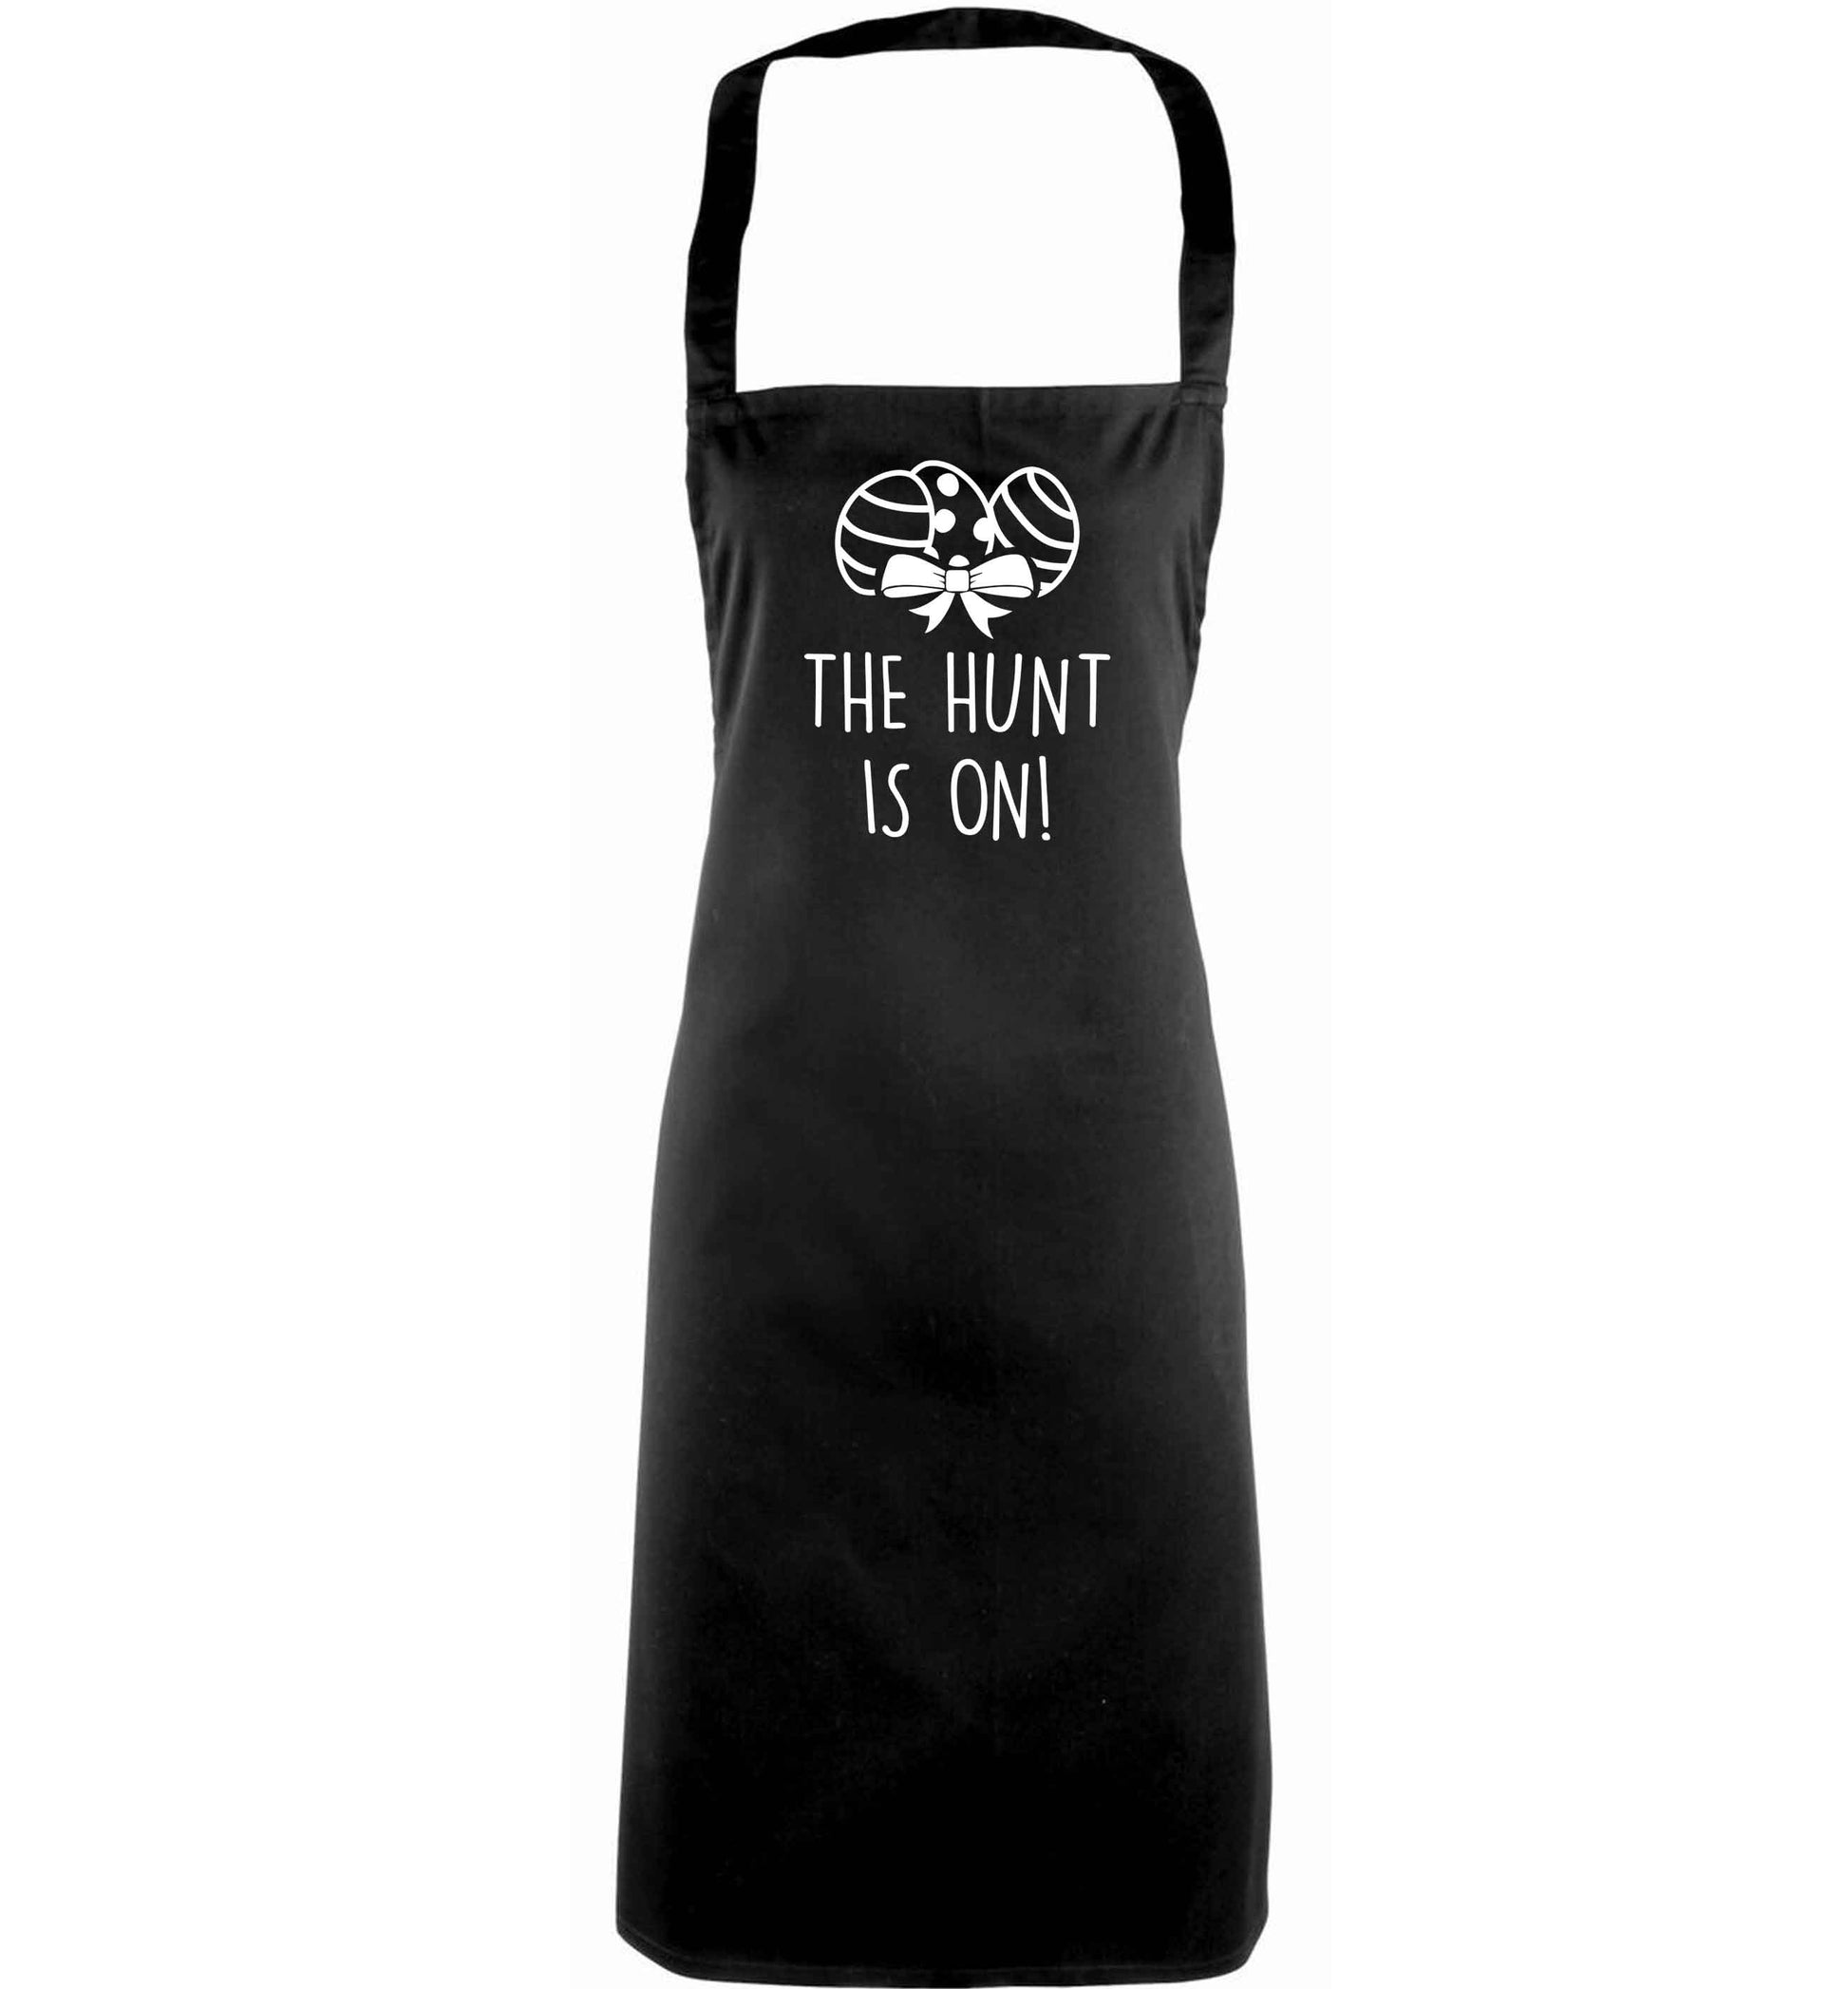 The hunt is on adults black apron